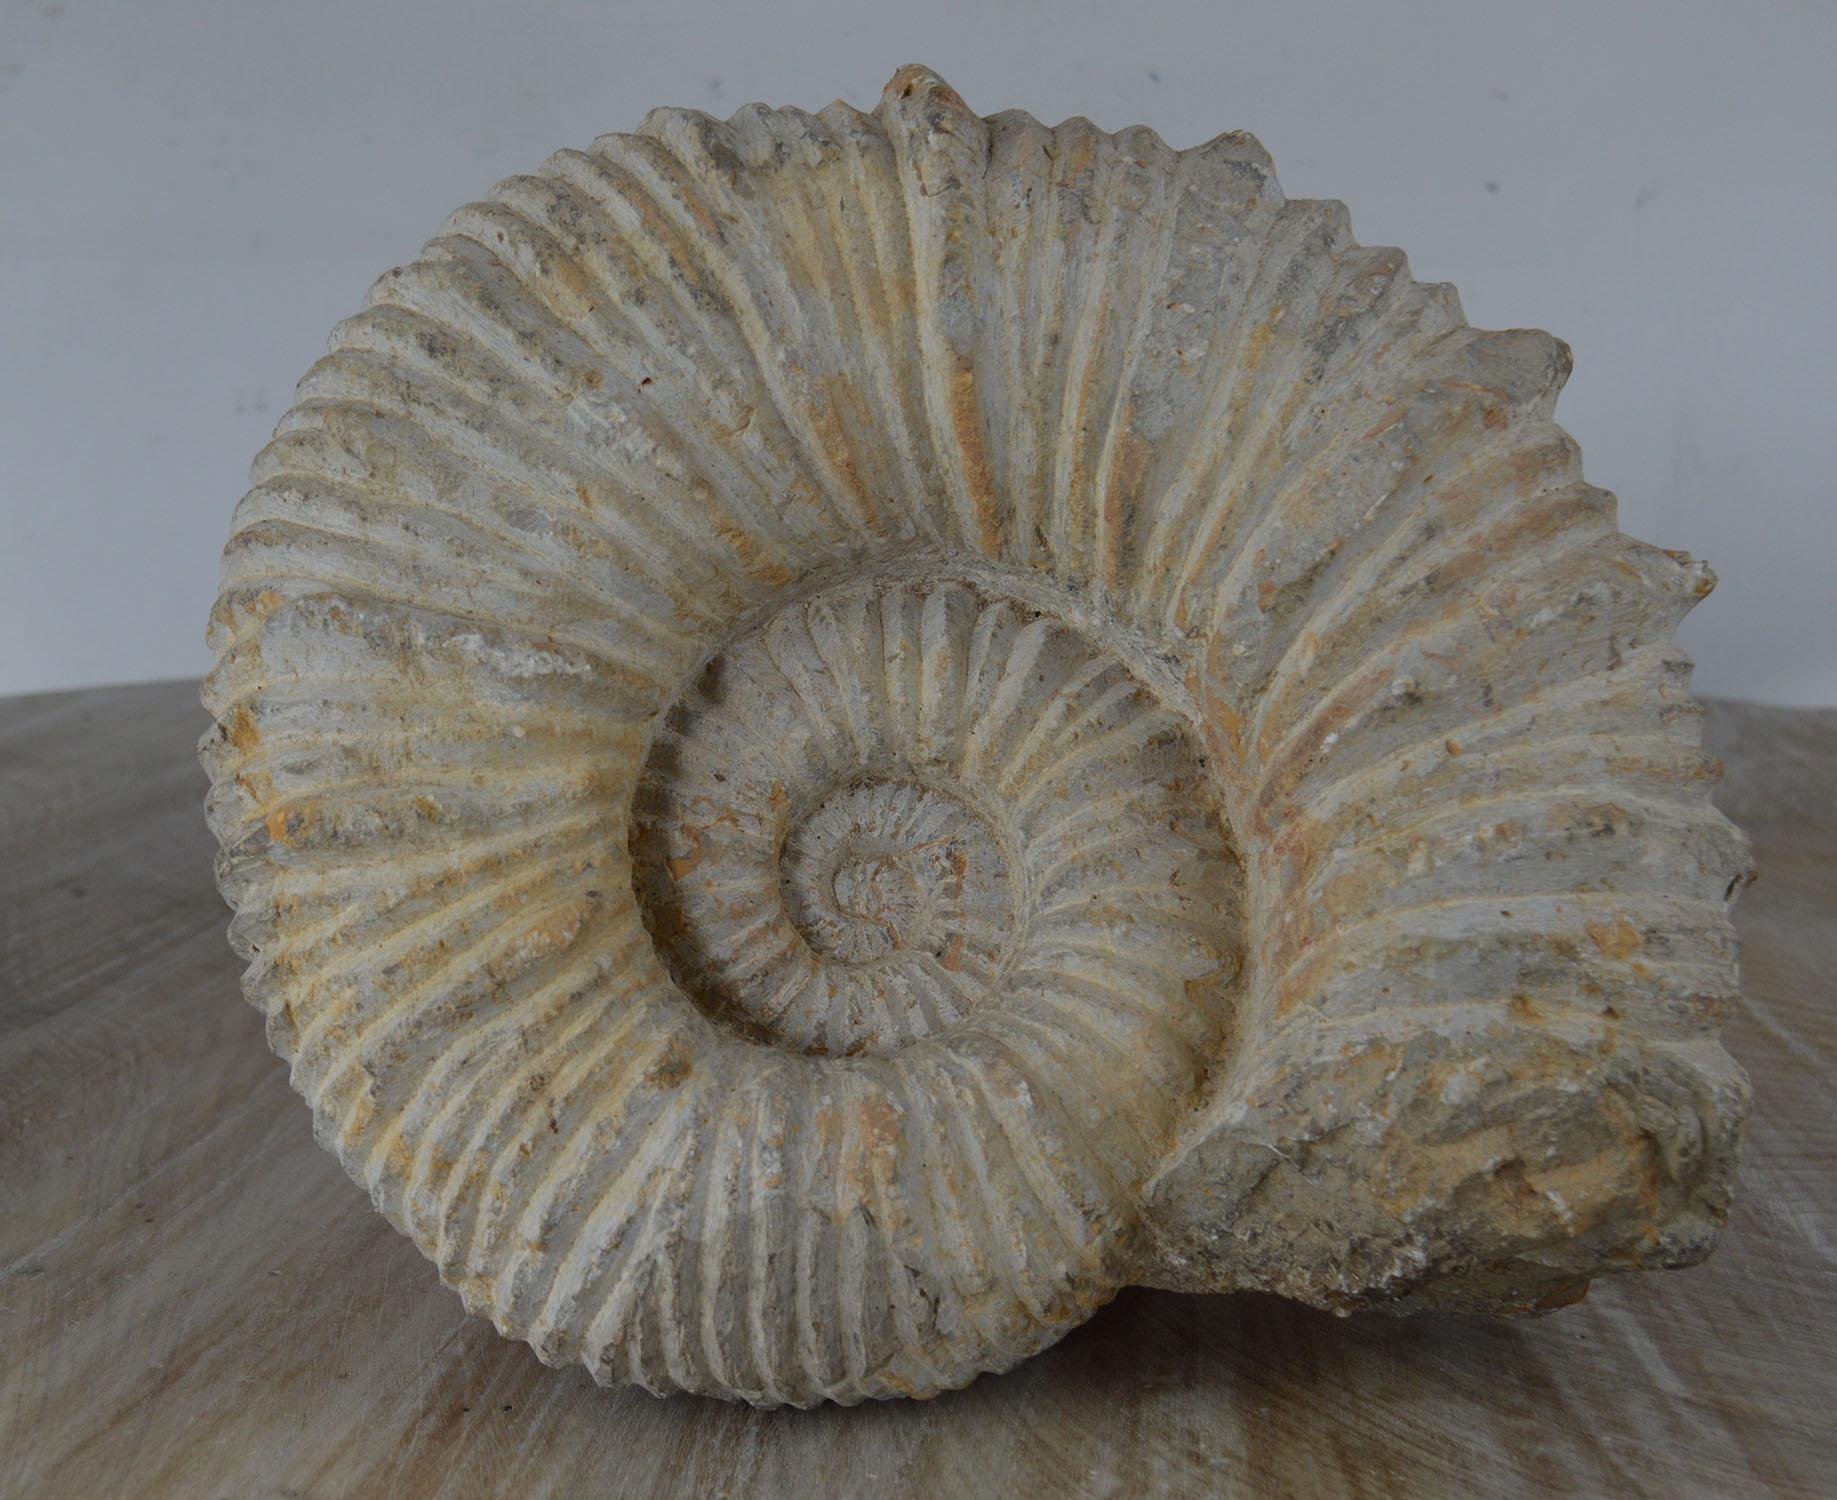 Lovely ammonite in good condition.

Fabulous color.

Formed 150 million years ago

Found in the Sahara Desert. Measures: 12.5 inches wide.